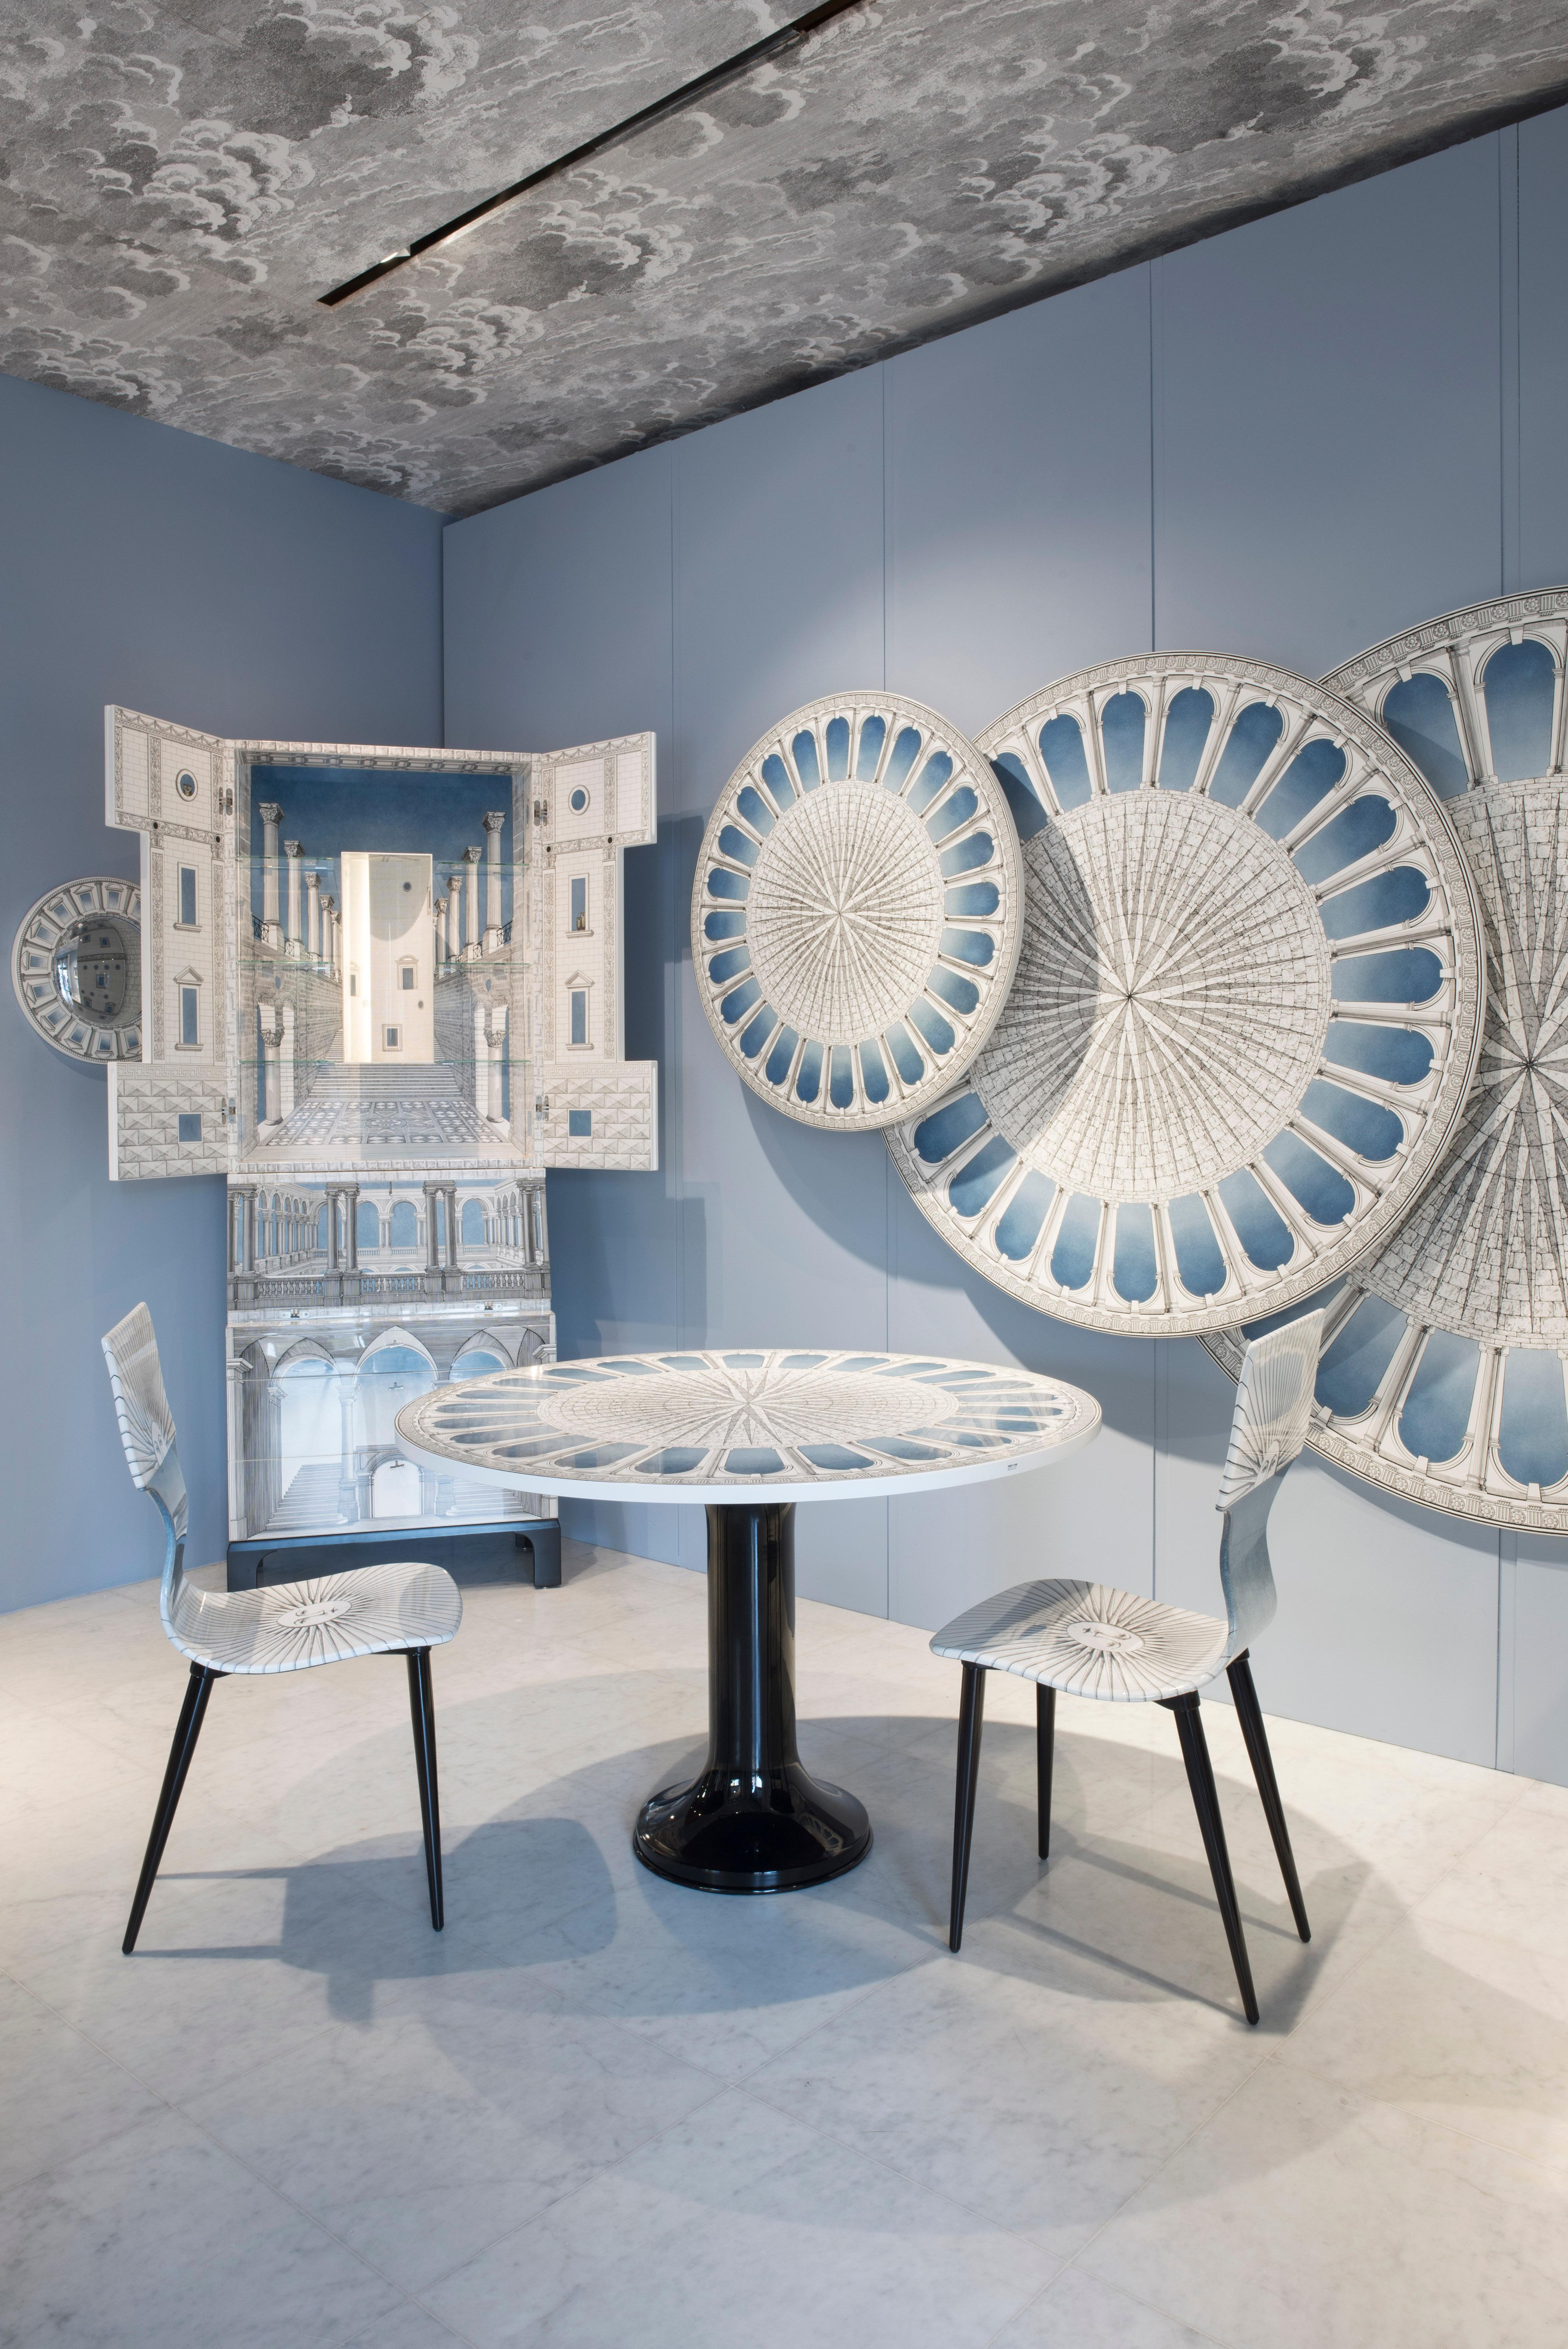 Fornasetti's take on the most classical piece of design, the chair, is a groundbreaking achievement in imagination. 

The Fornasetti chairs and stools are going to be the most surprising detail of your house. 

This chair is handcrafted using